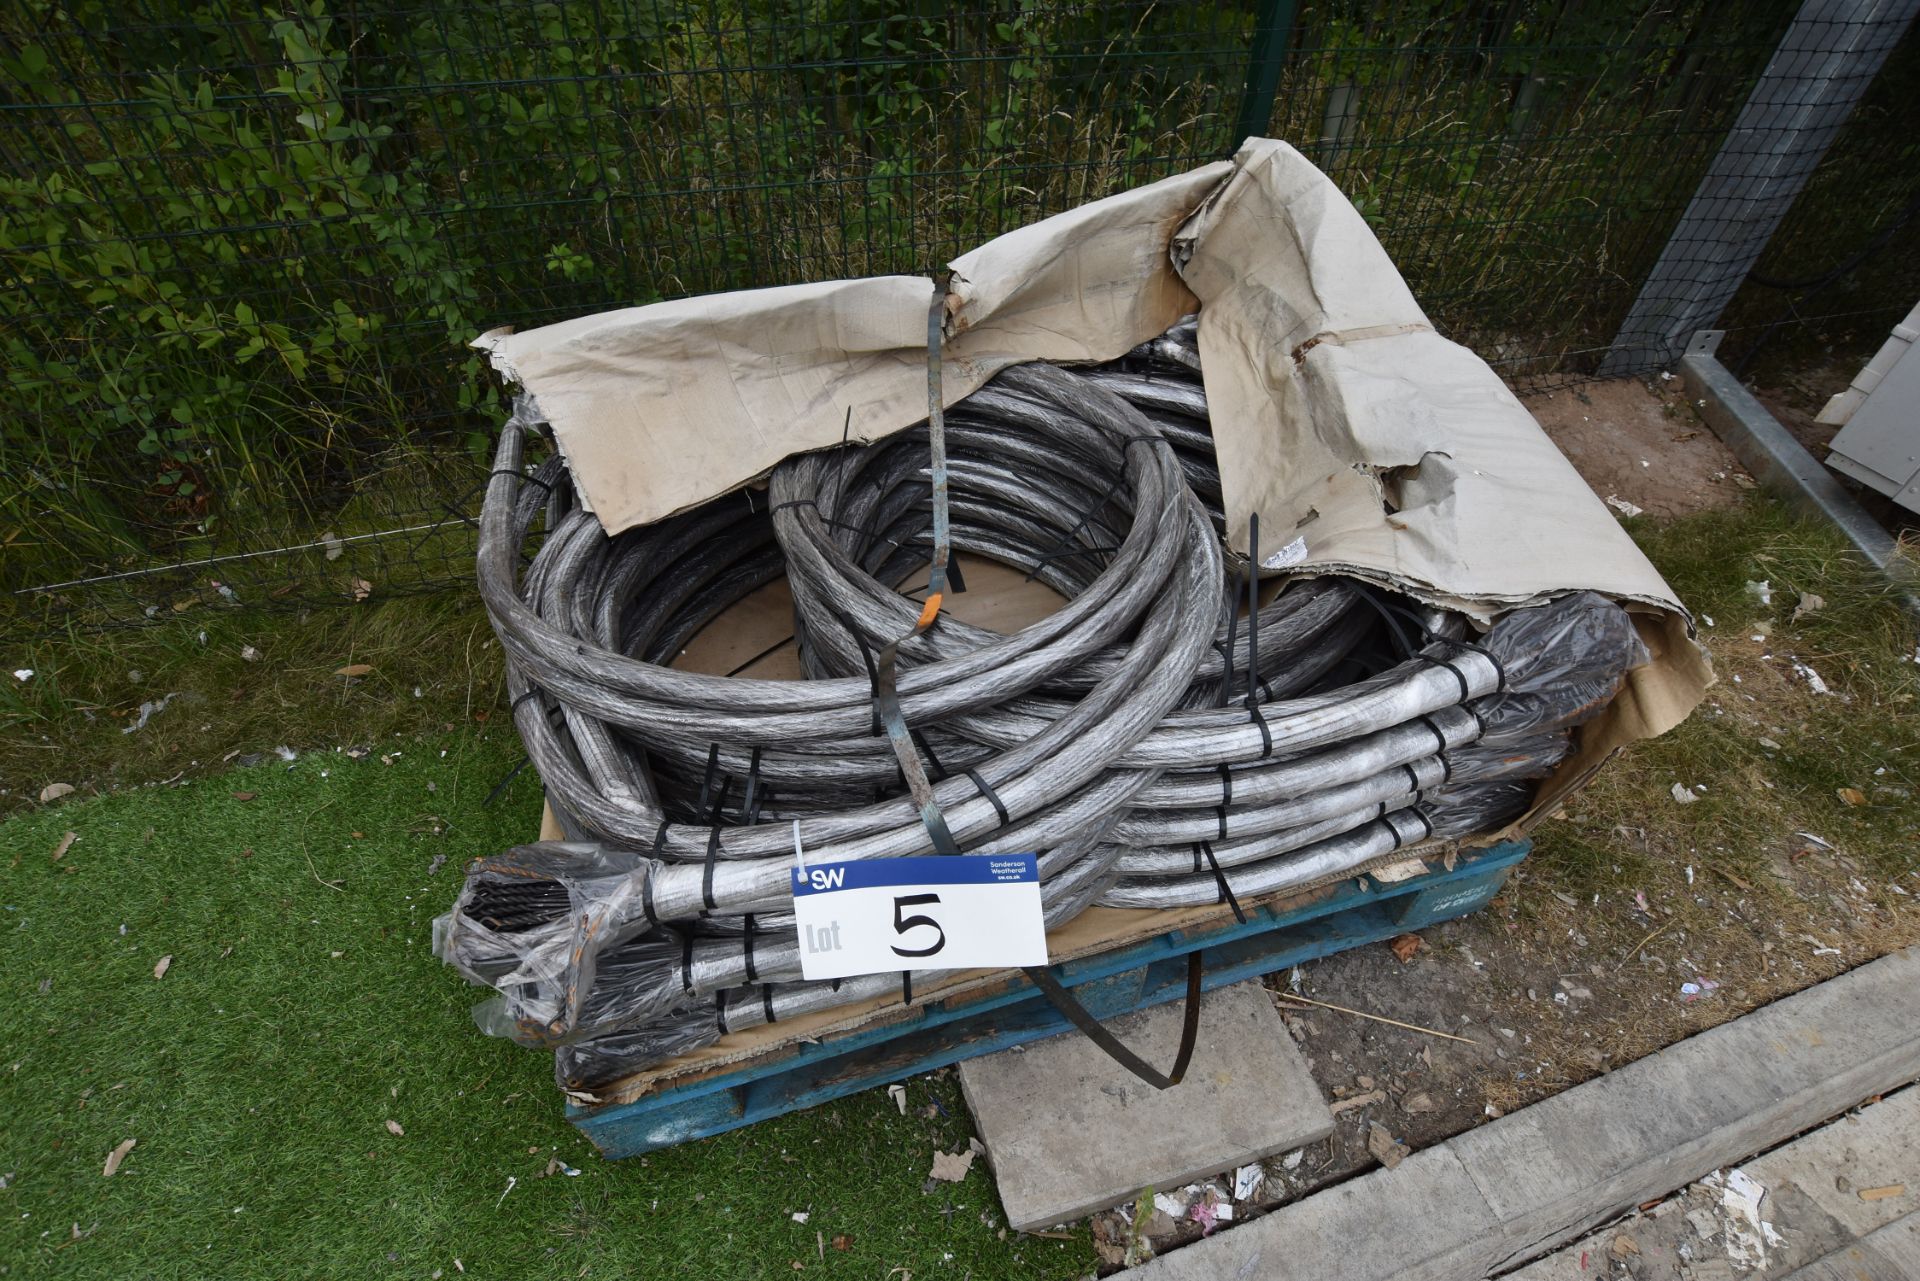 Pallet containing quantity of Baling Wire